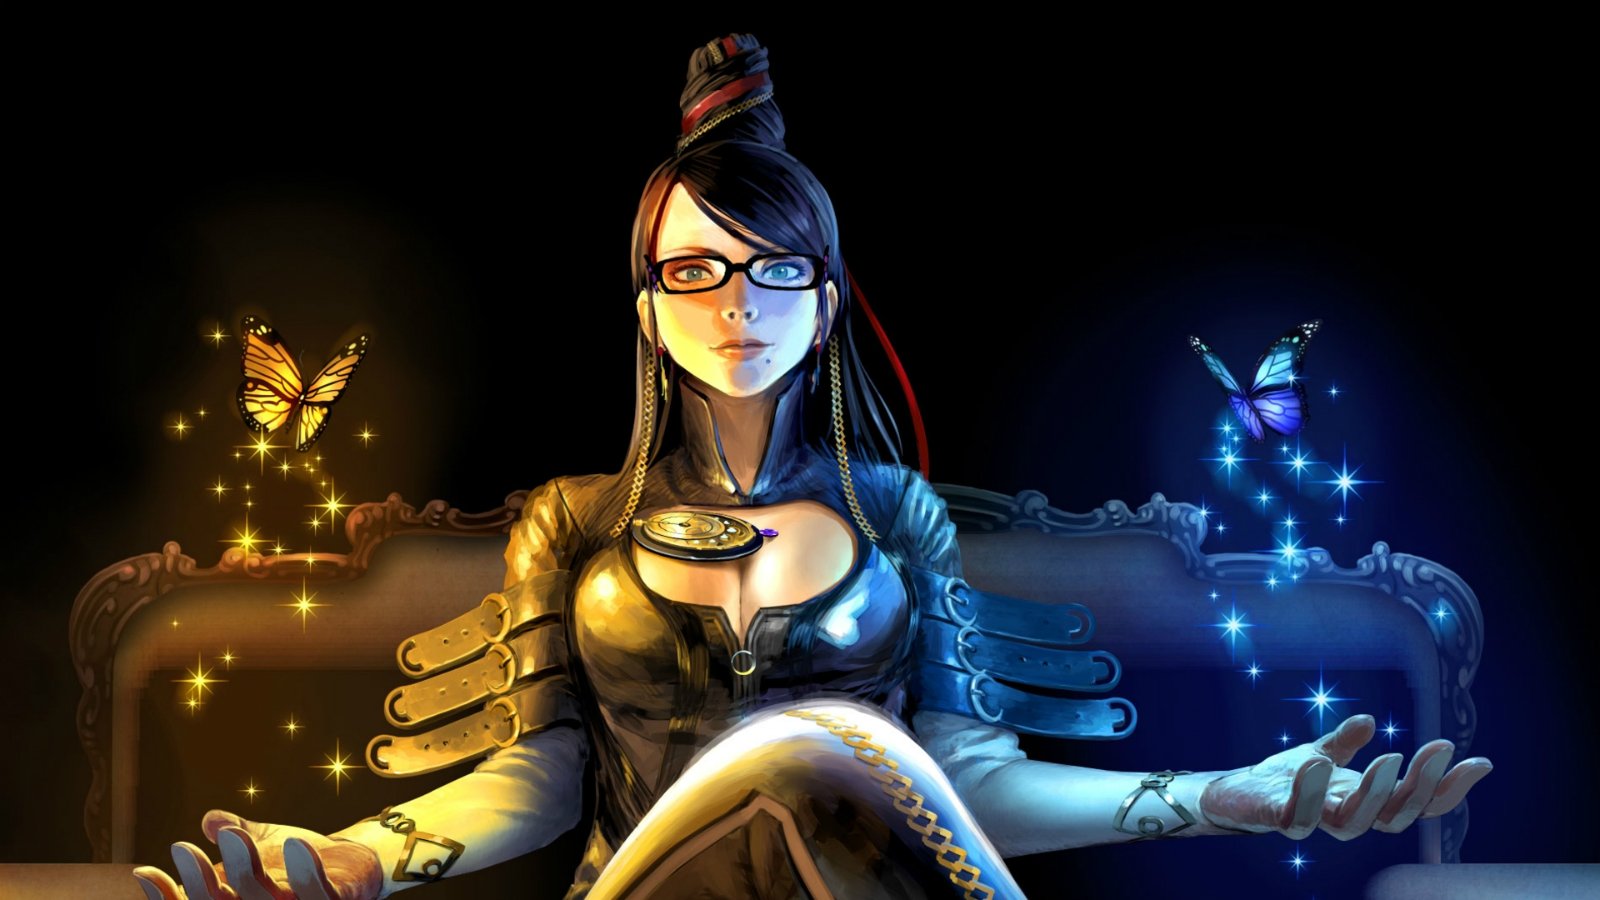 Bayonetta HD PS3 Game Wallpapers Download Free Wallpapers in HD for